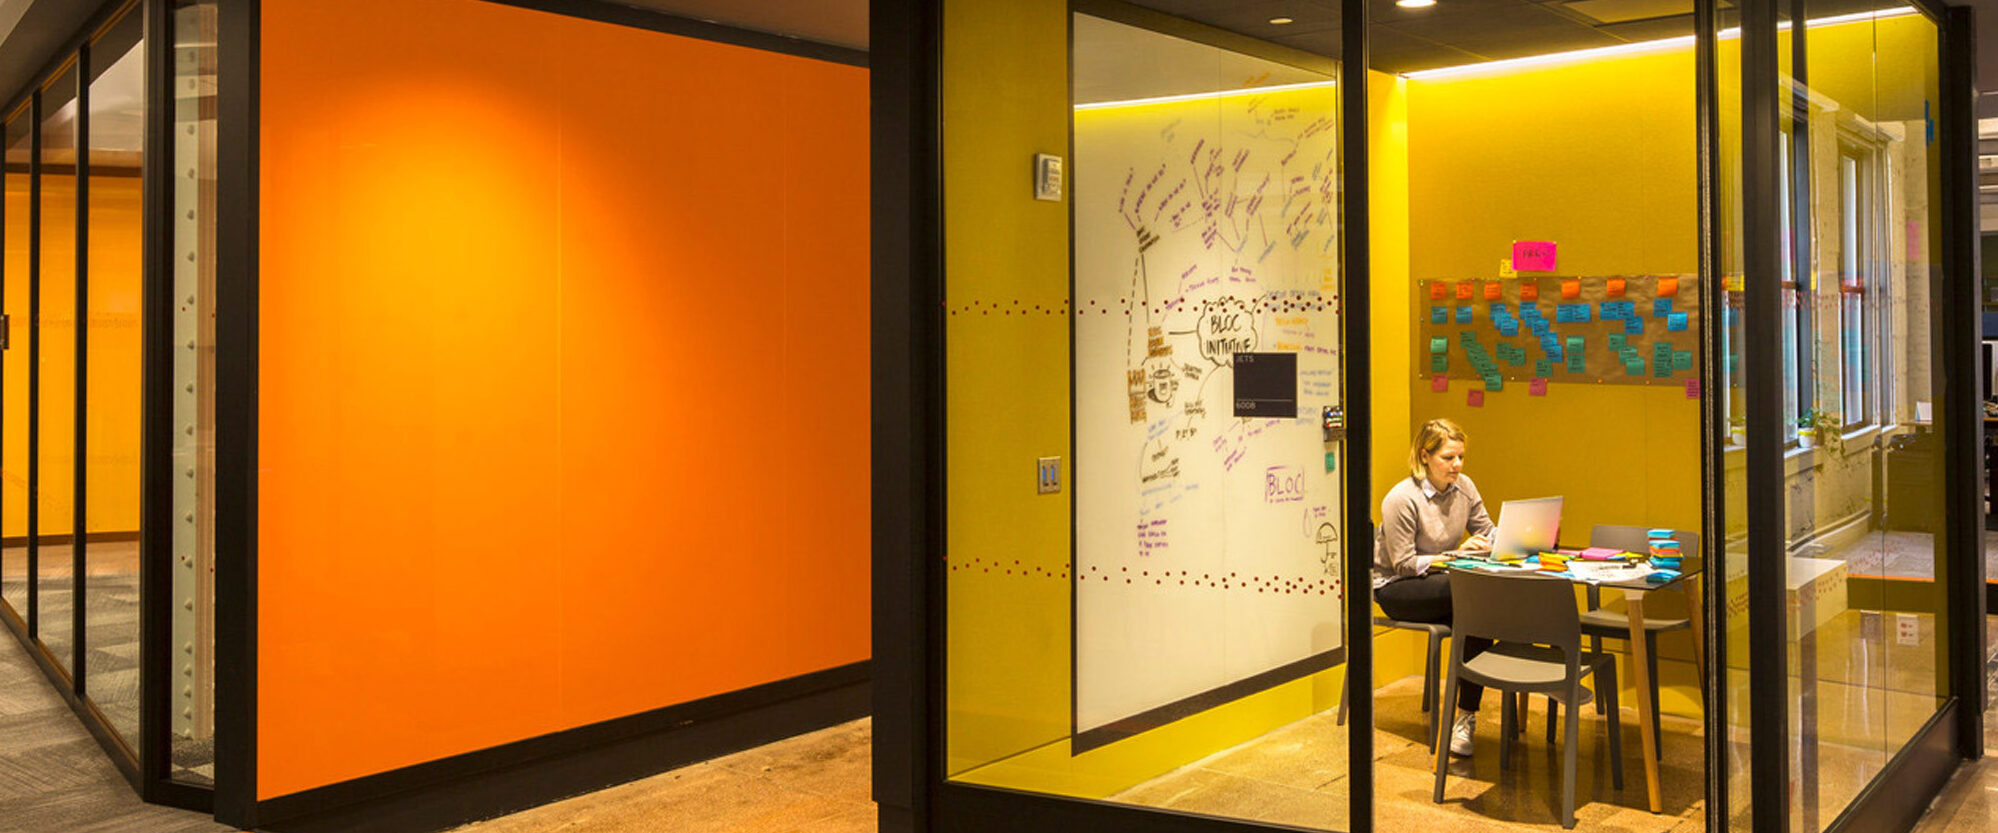 Modern office space with vibrant orange and yellow hues featuring glass-partitioned meeting rooms. A person works at a desk with post-it notes on the wall, suggesting creative brainstorming within a contemporary design.